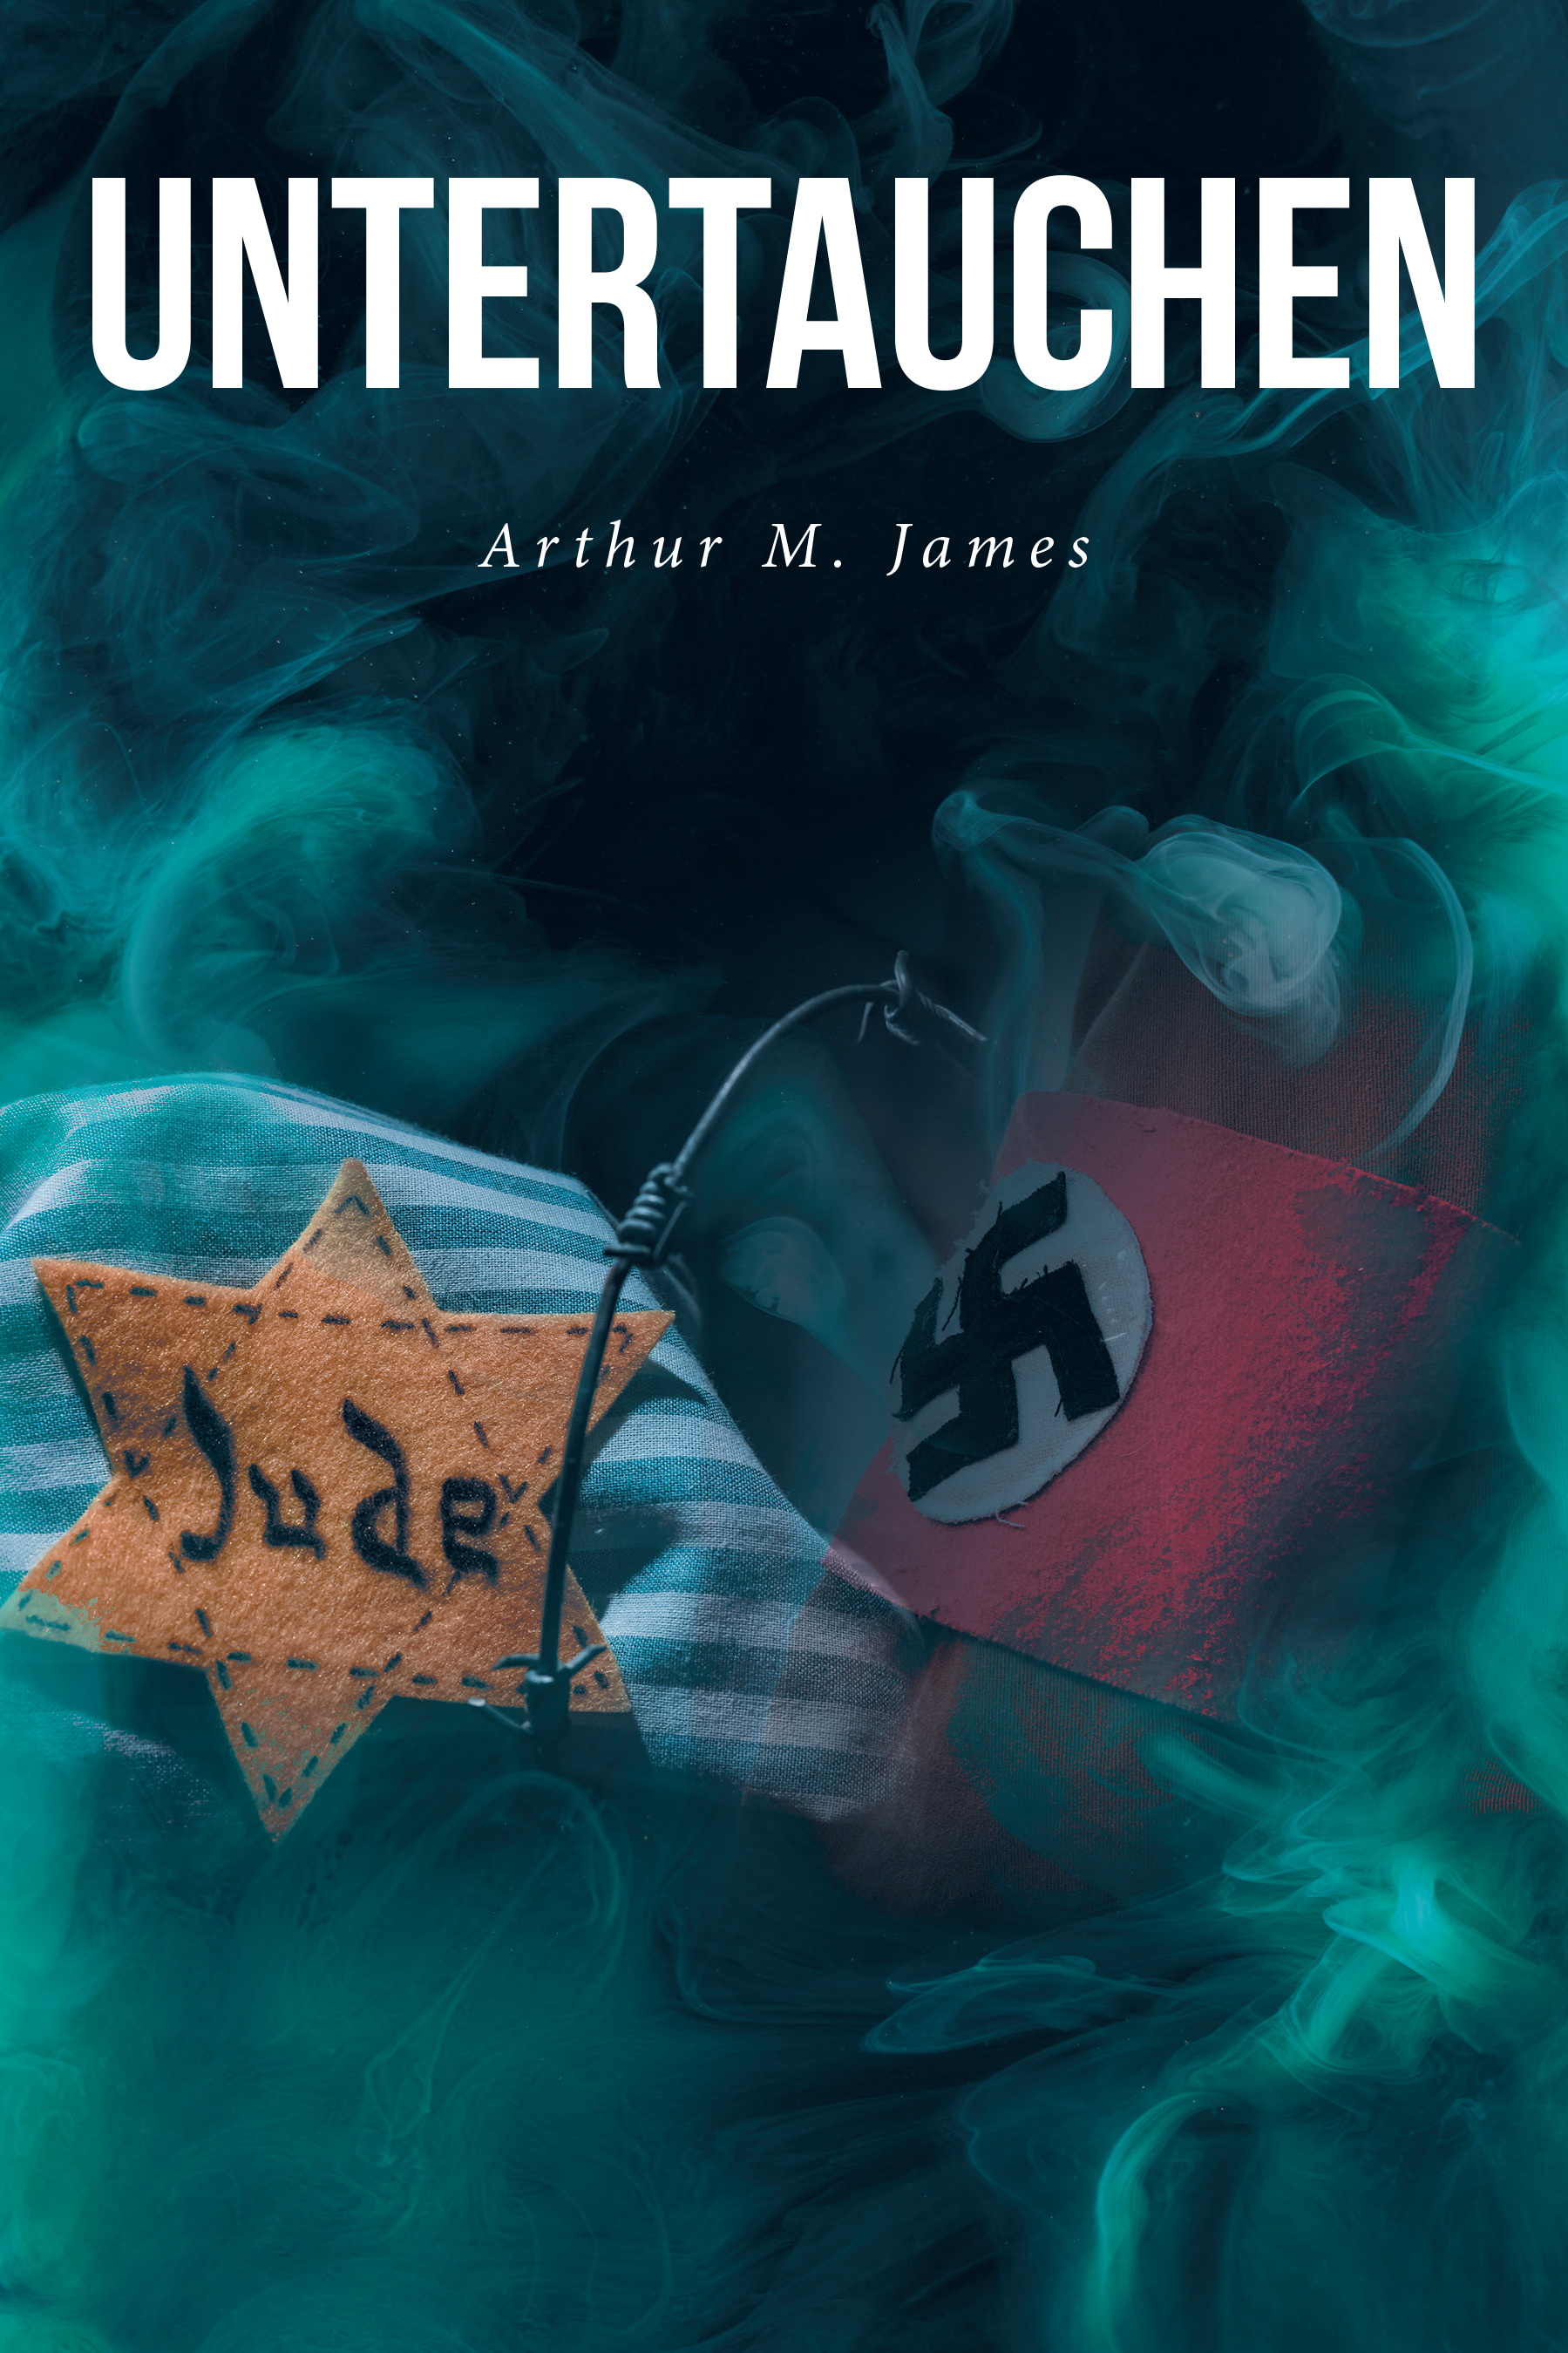 Arthur M. James’s New Book, "Untertauchen: A Historical Novel," Follows a Jewish Couple Living in Nazi Germany Who Must Go Into Hiding and Eventually Flee Their Home